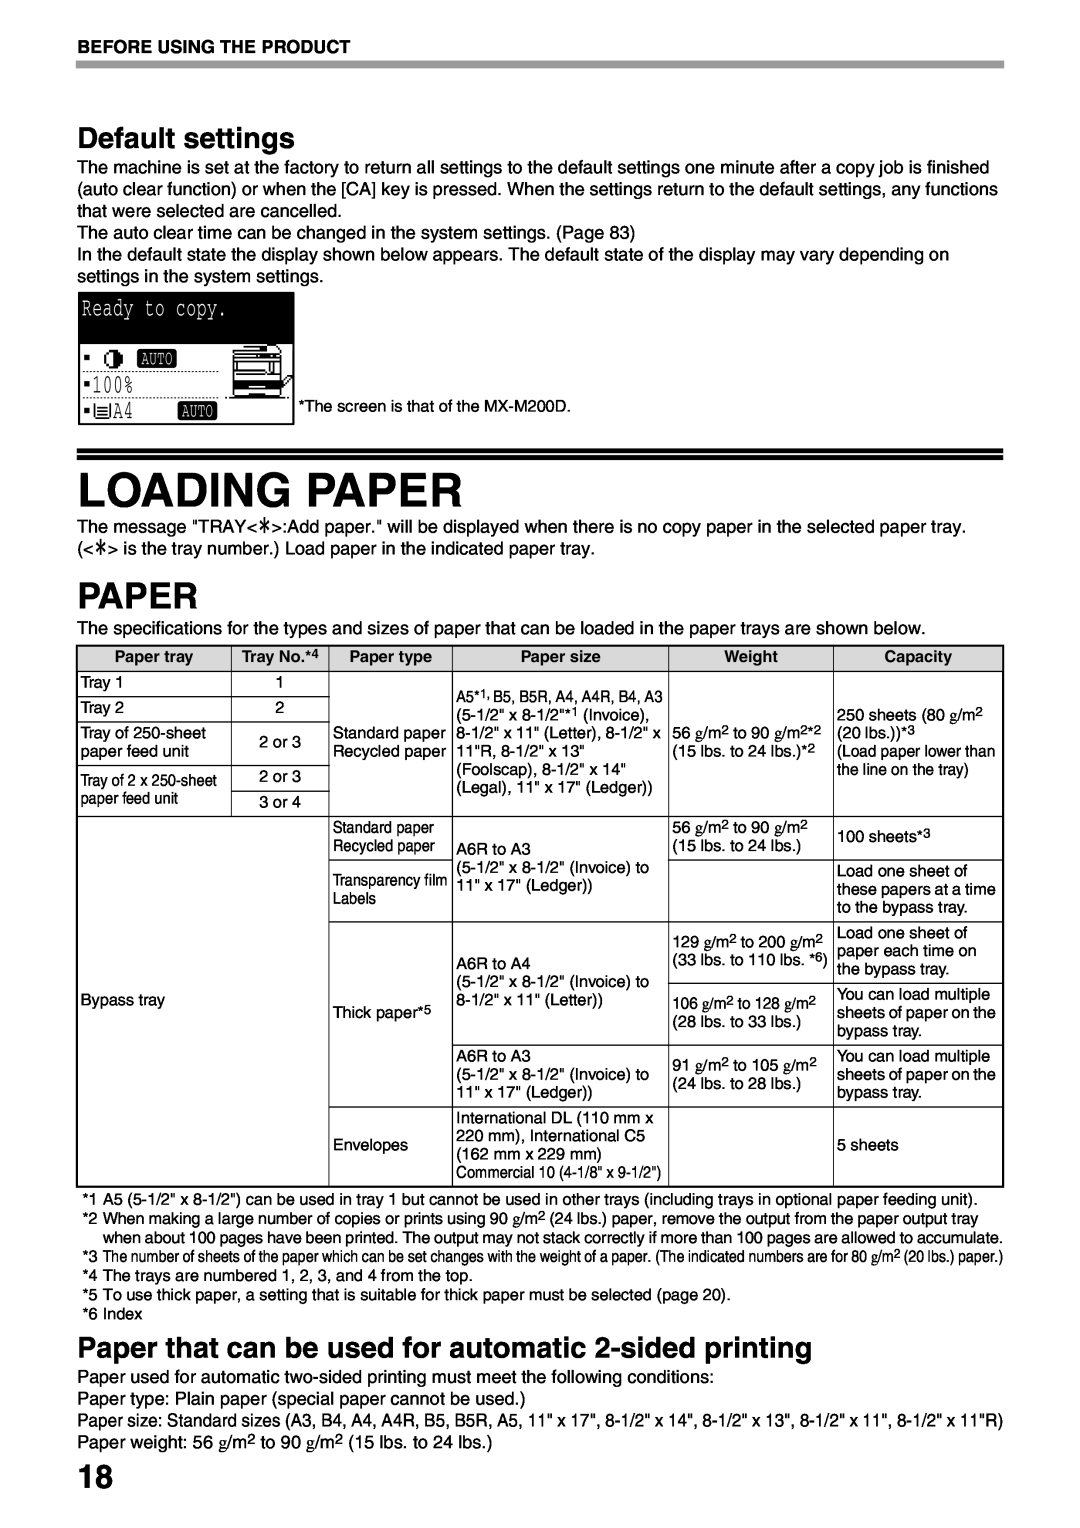 Sharp MX-M160D Loading Paper, Default settings, Paper that can be used for automatic 2-sided printing, Ready to copy, Auto 